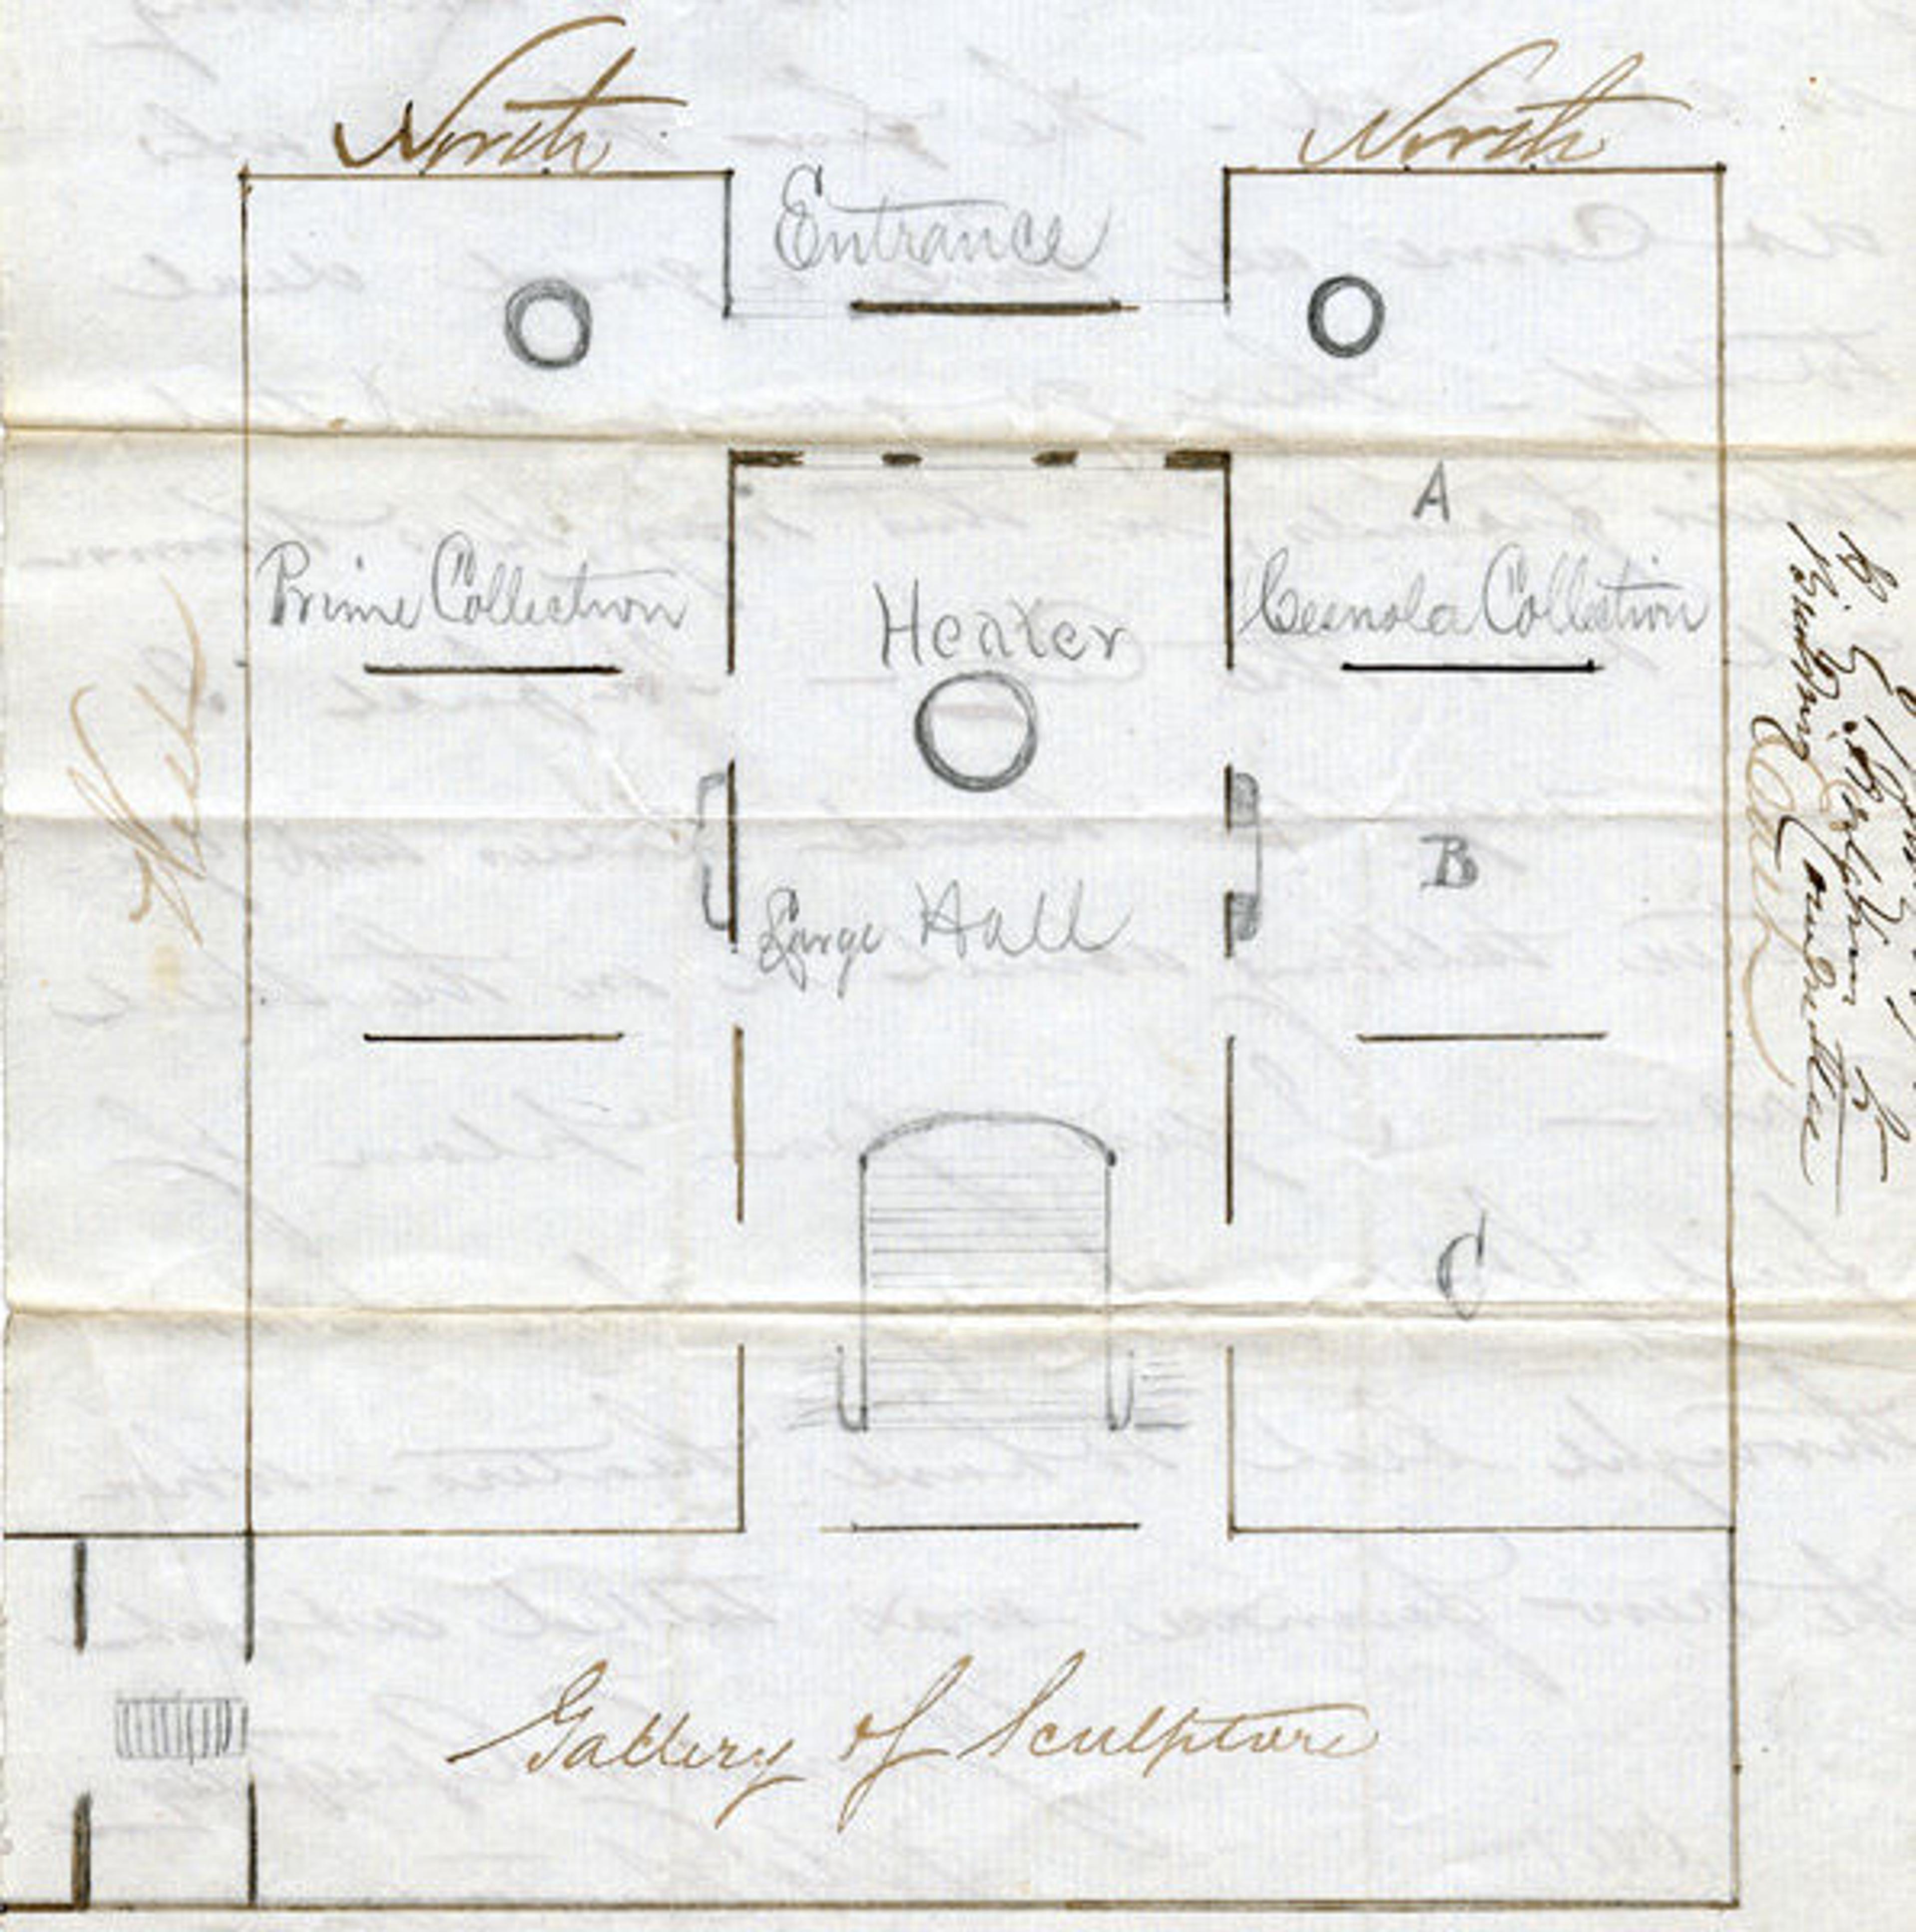 Plan of the first floor of the Douglas Mansion